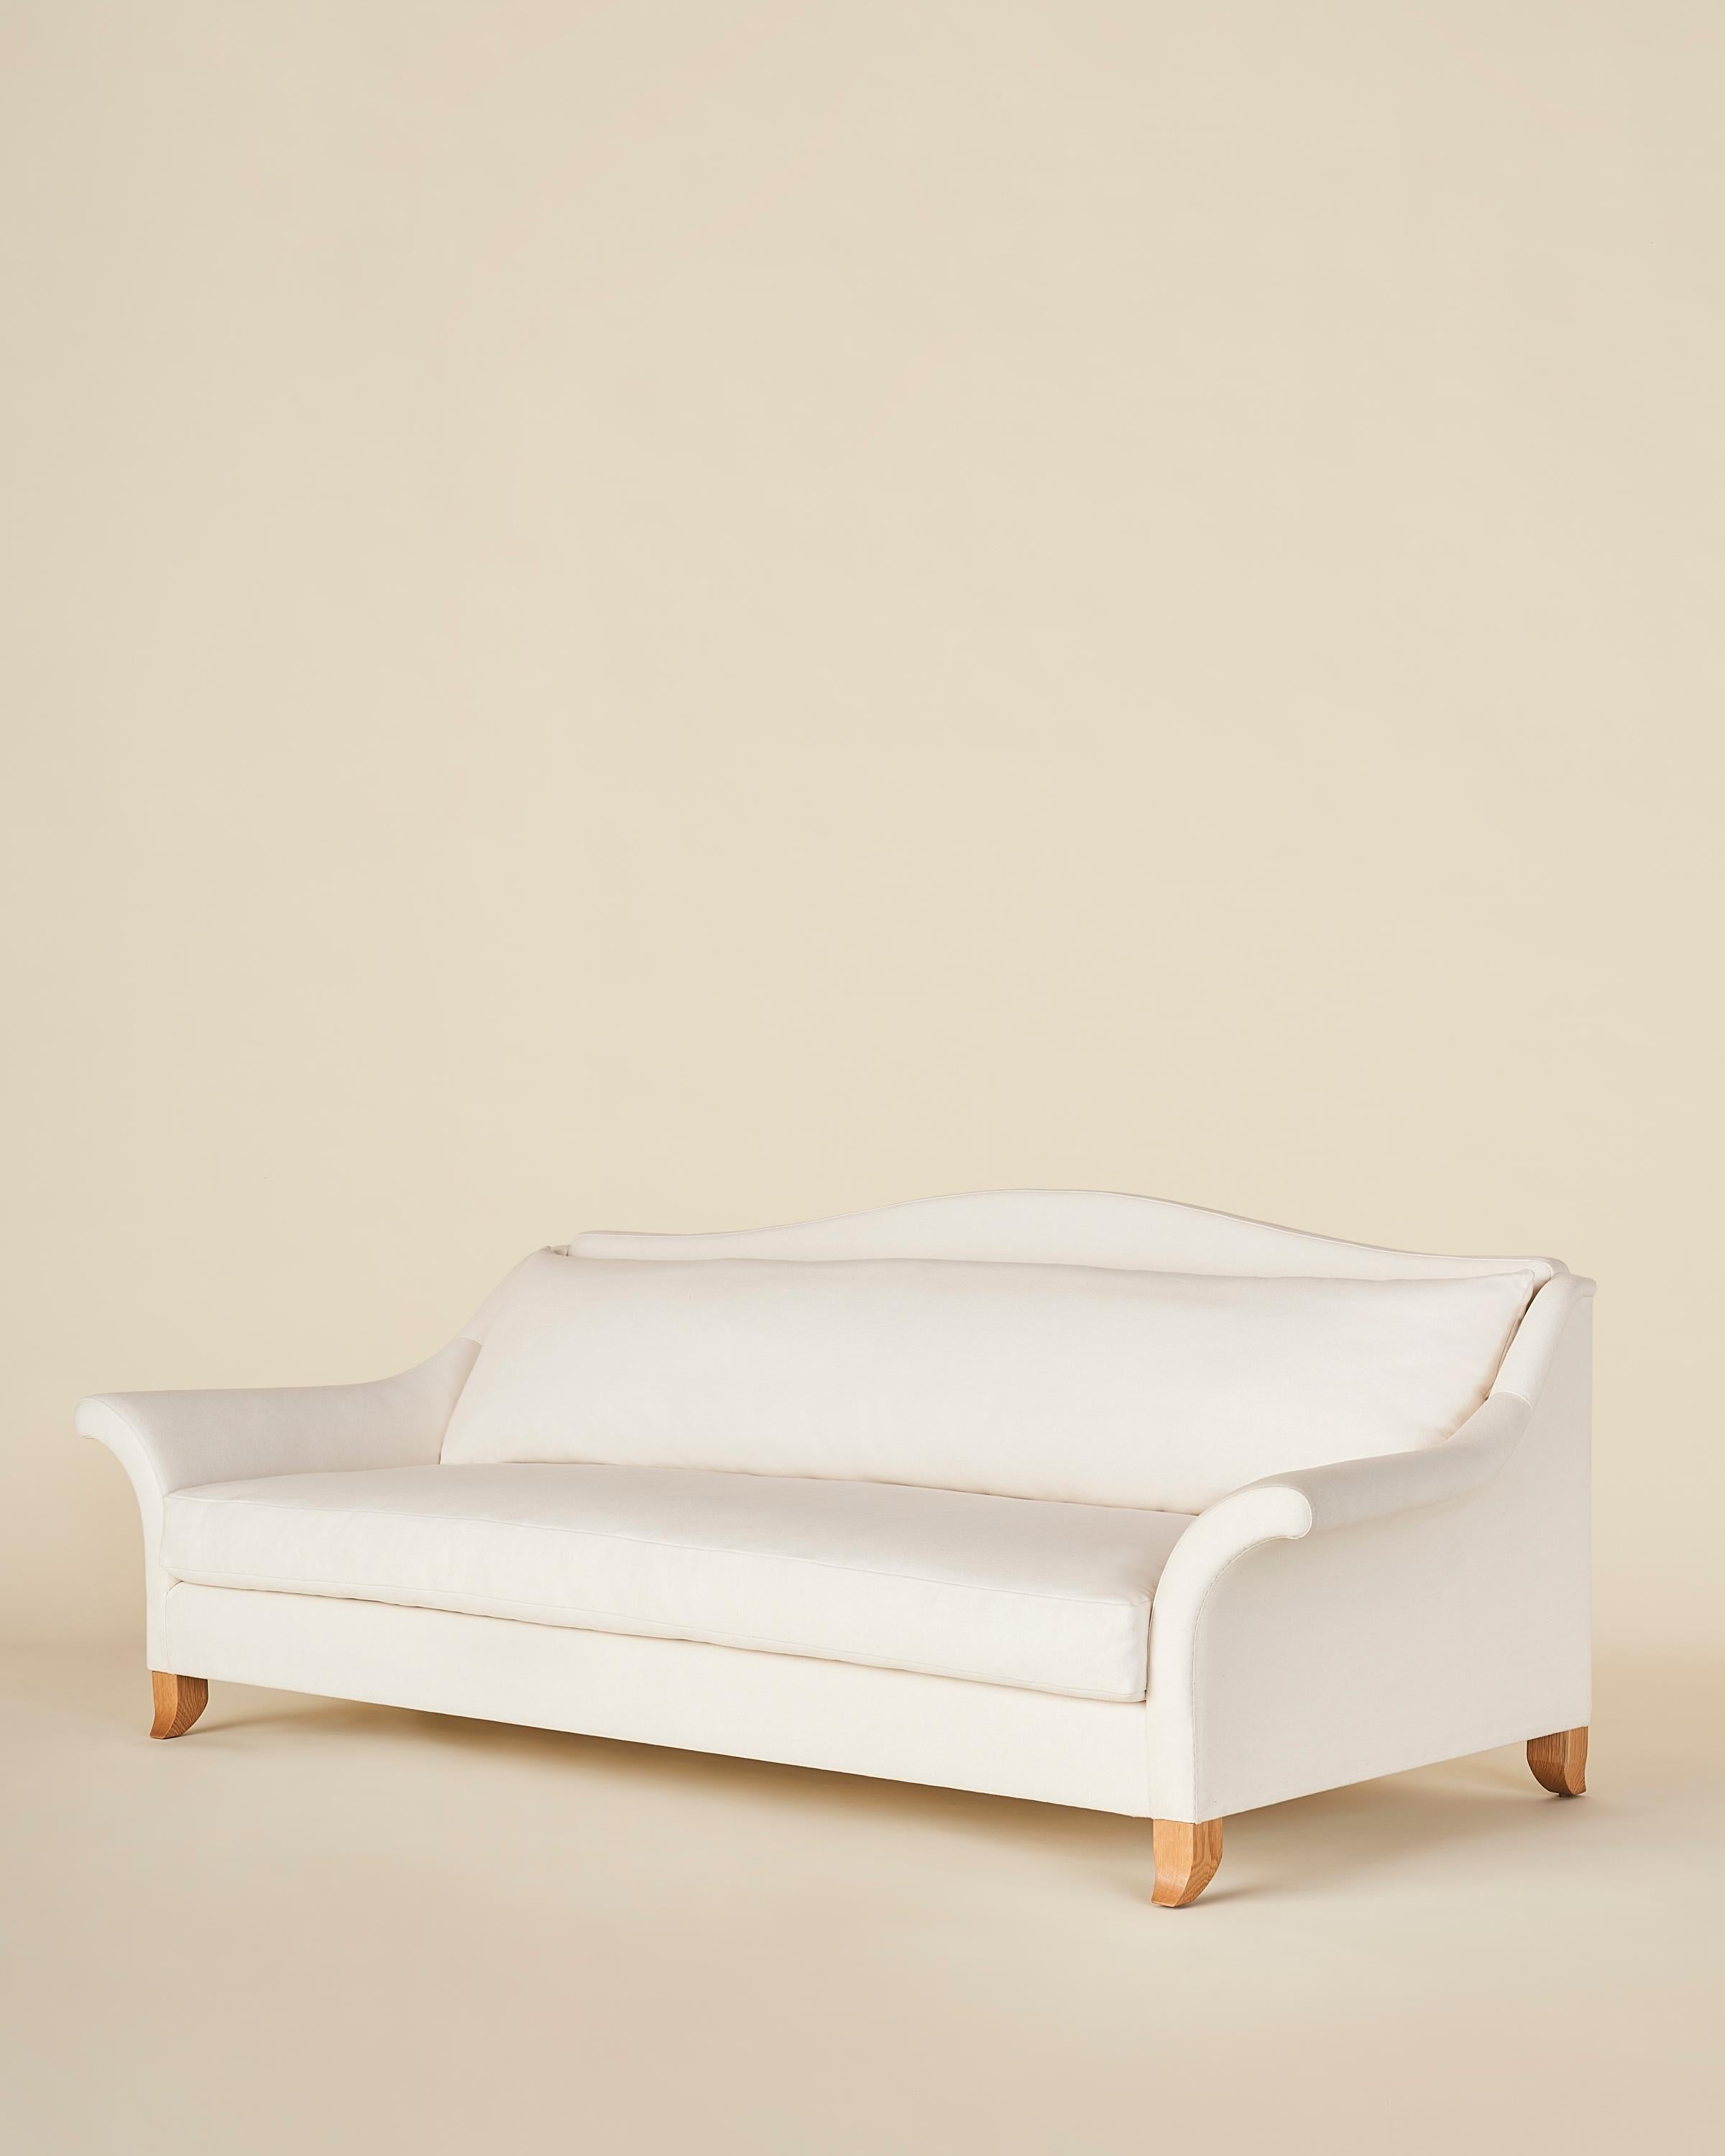 This classic camelback sofa with a dramatic, swept-out, flared arm and a flared solid oak leg. The solitary seat and back cushion create a seamless and clean look. The piece is constructed with a solid oak frame. 

Shown in Winter White Linen and